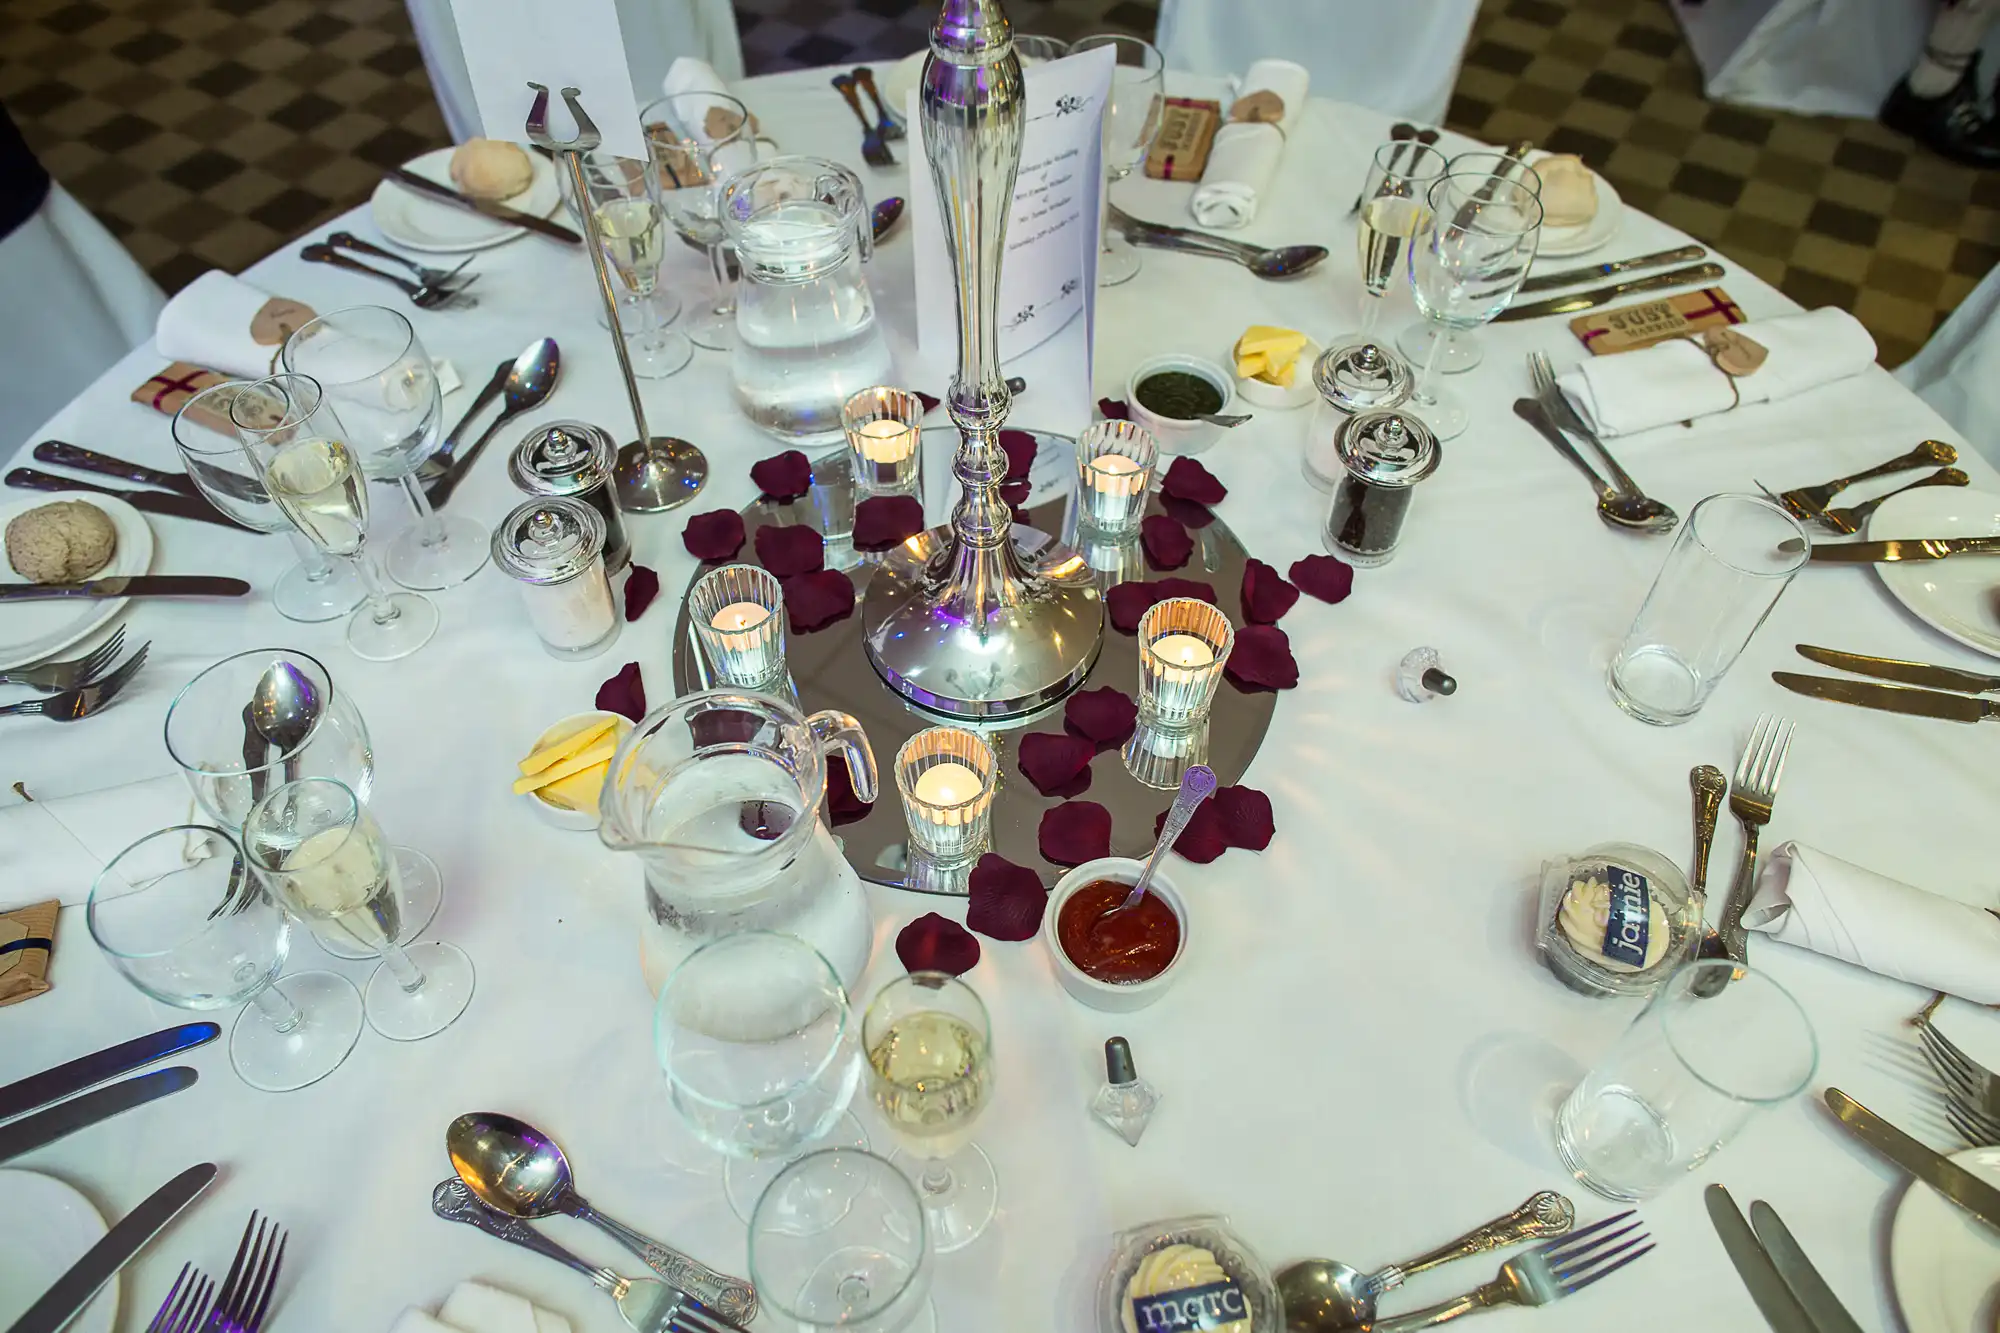 An elegantly set banquet table with silverware, glasses, candles, and scattered rose petals.